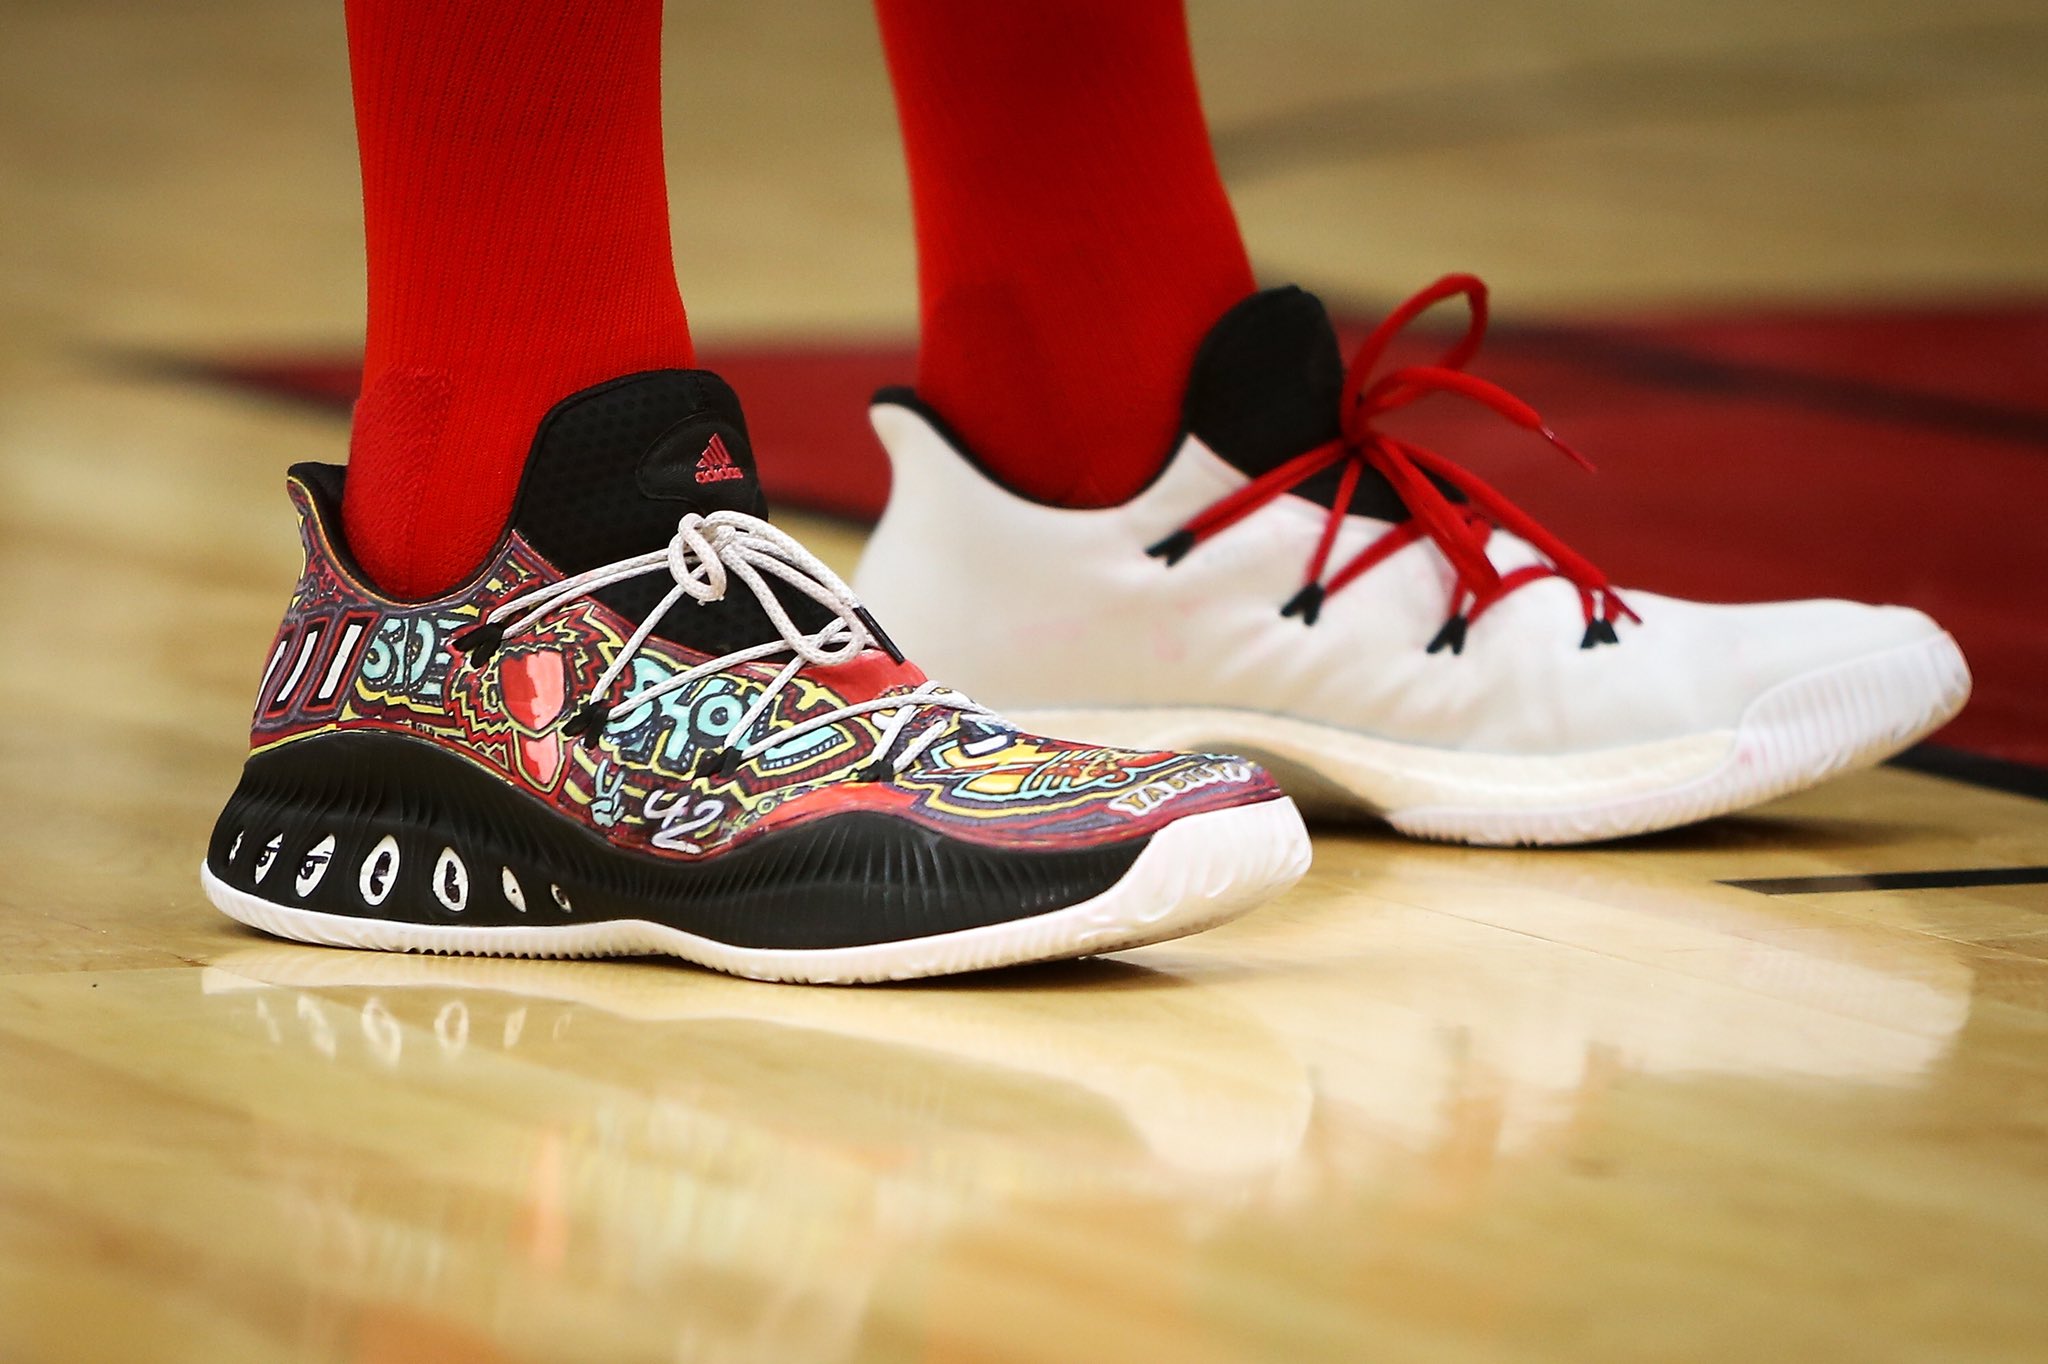 B/R Kicks on X: "Robin Lopez customized his own adidas Crazy Explosive Low  https://t.co/P14hi8Oeh6" / X